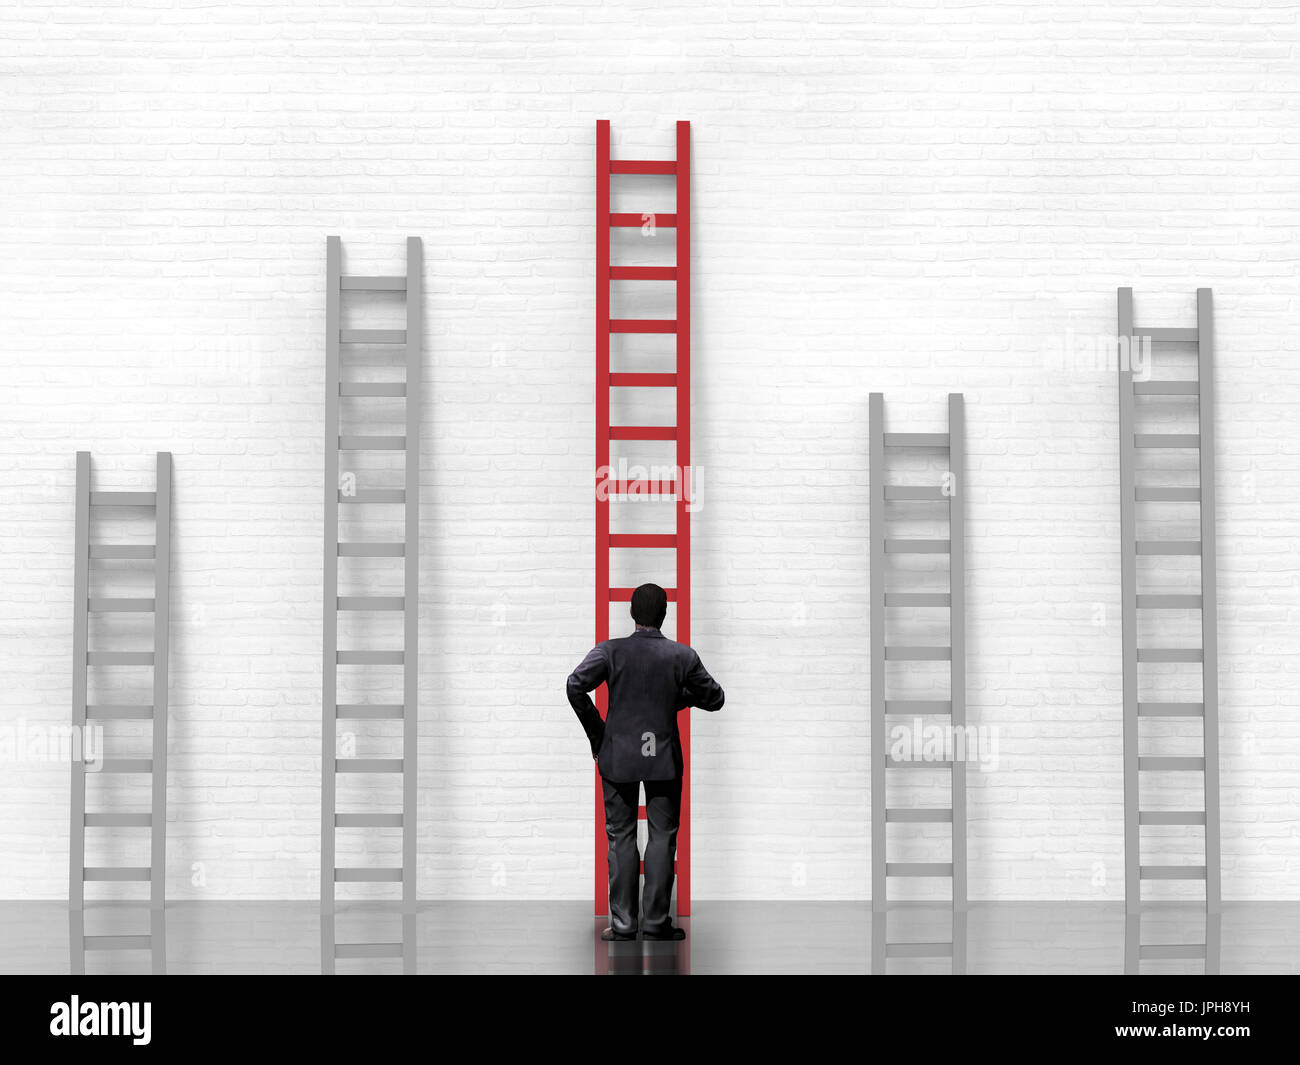 rear view of businessman standing with ladder to success Stock Photo